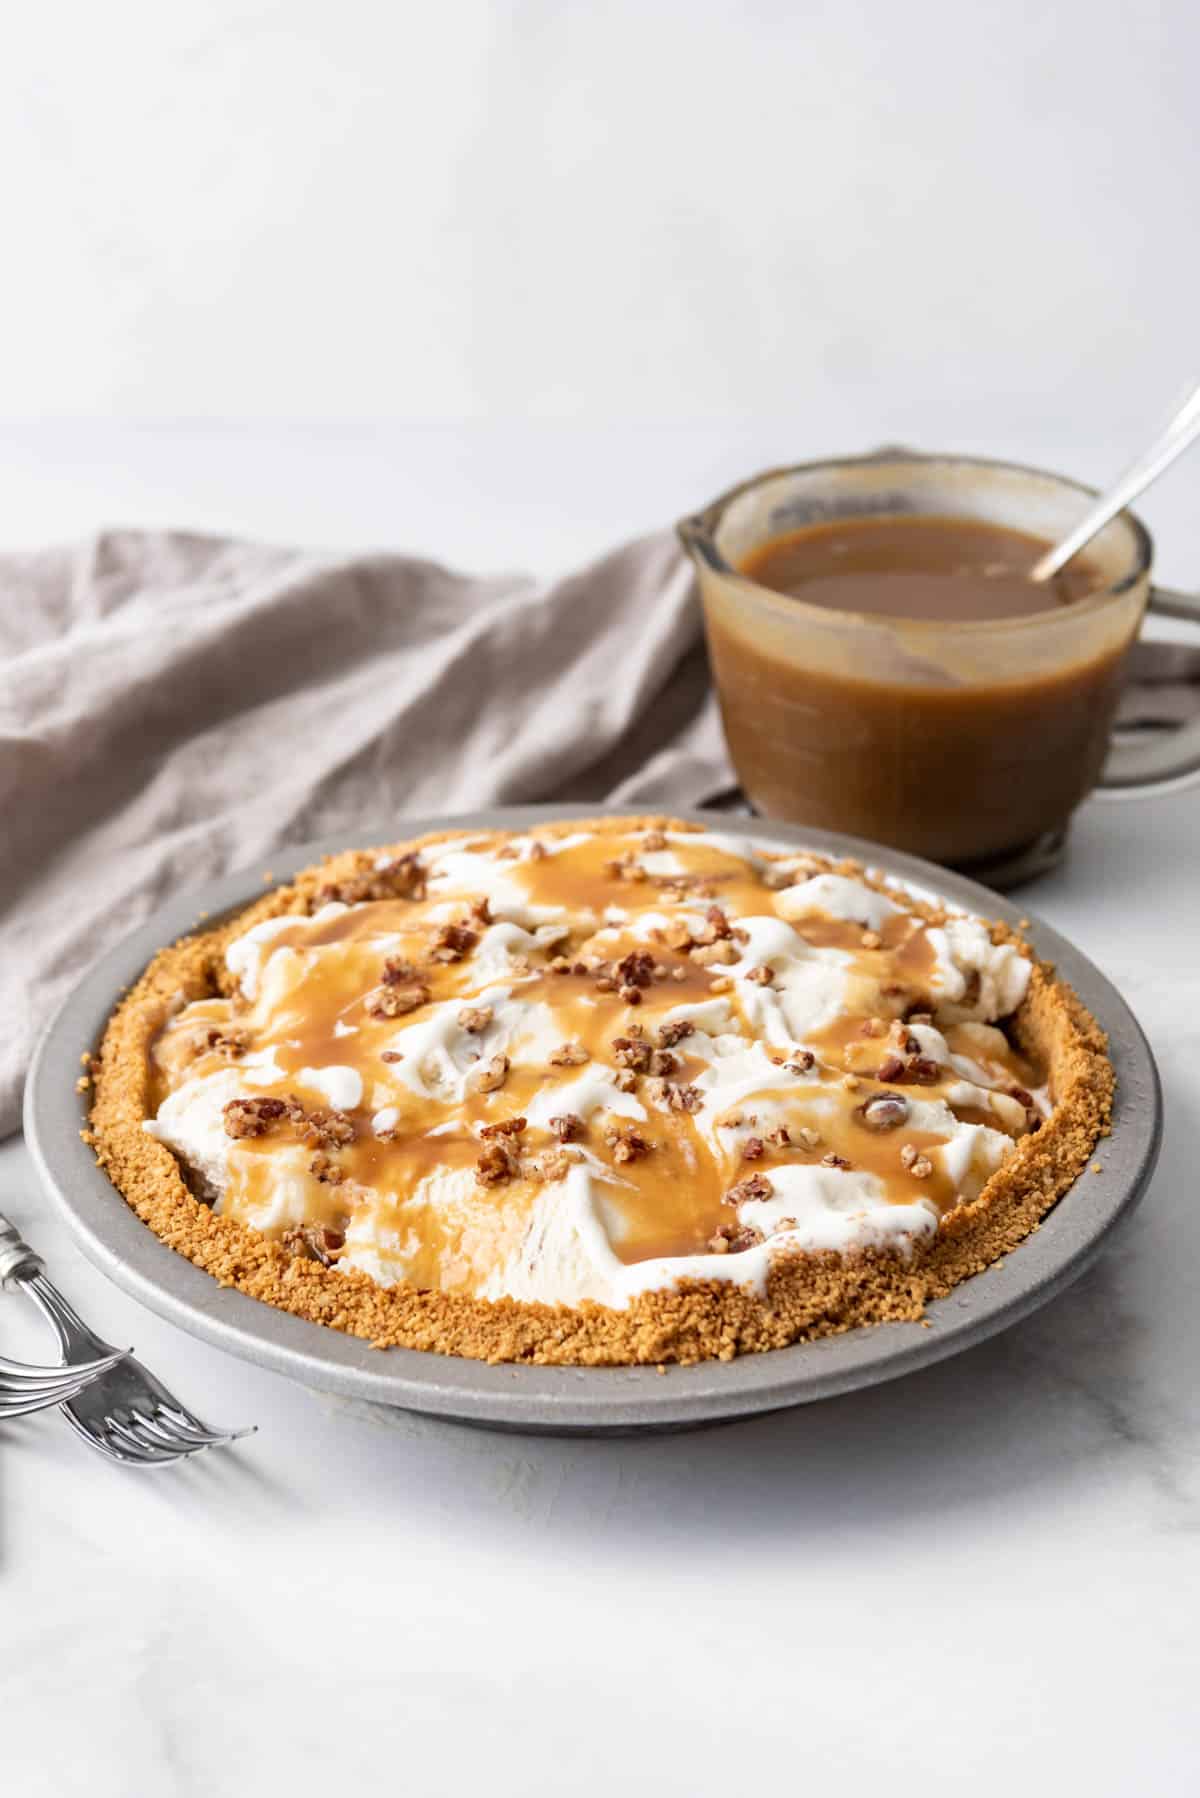 A butter pecan ice cream pie after being topped with butterscotch sauce.